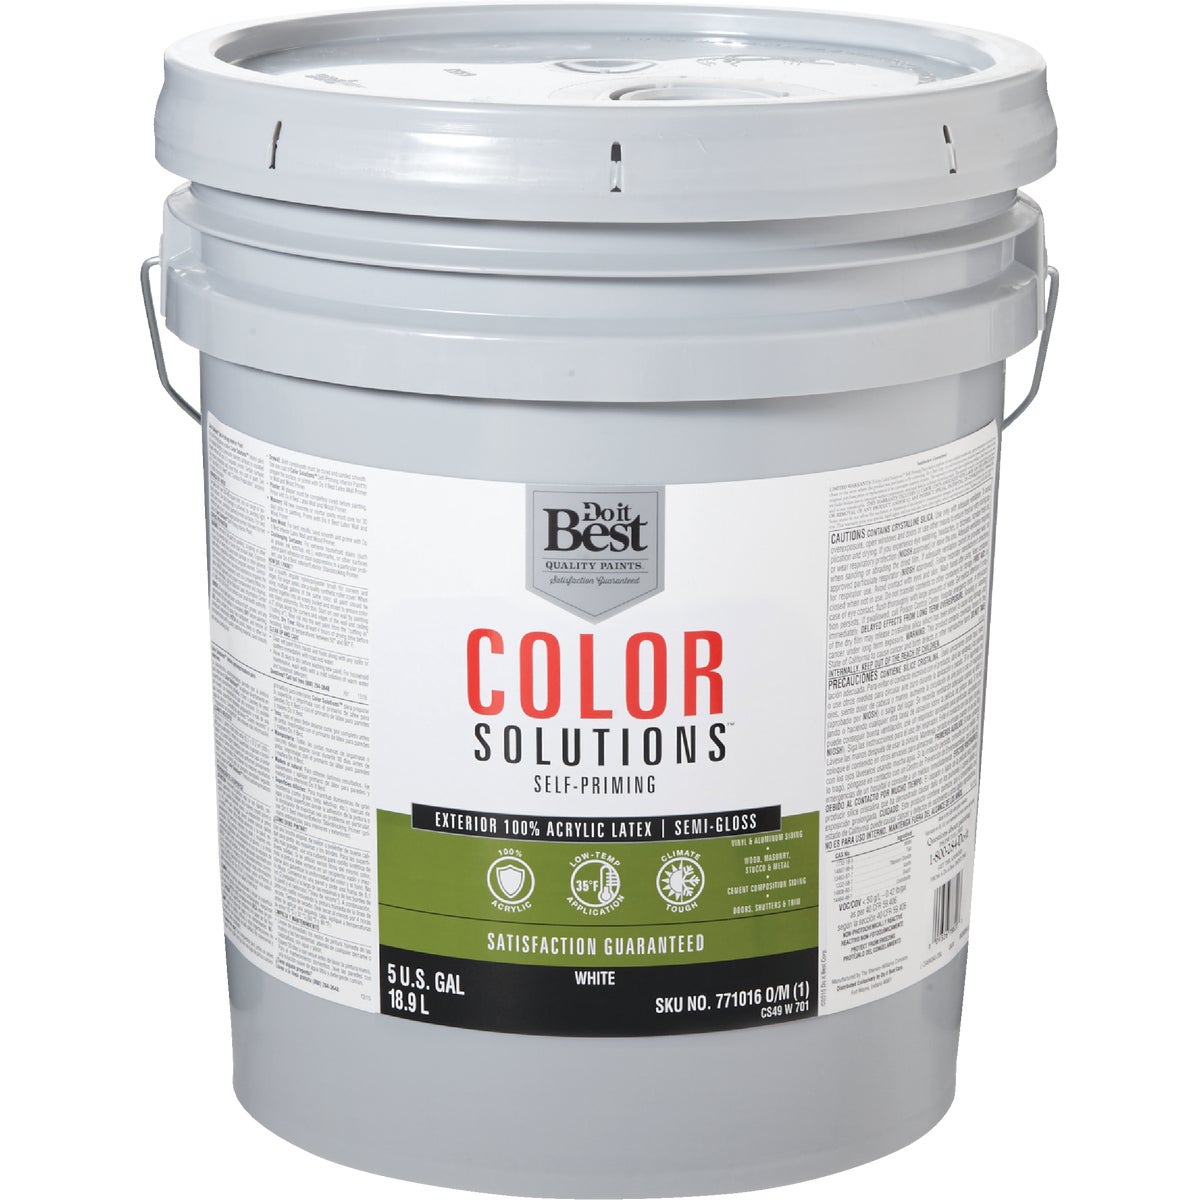 Do it Best Color Solutions 100% Acrylic Latex Self-Priming Semi-Gloss Exterior House Paint, White, 5 Gal.